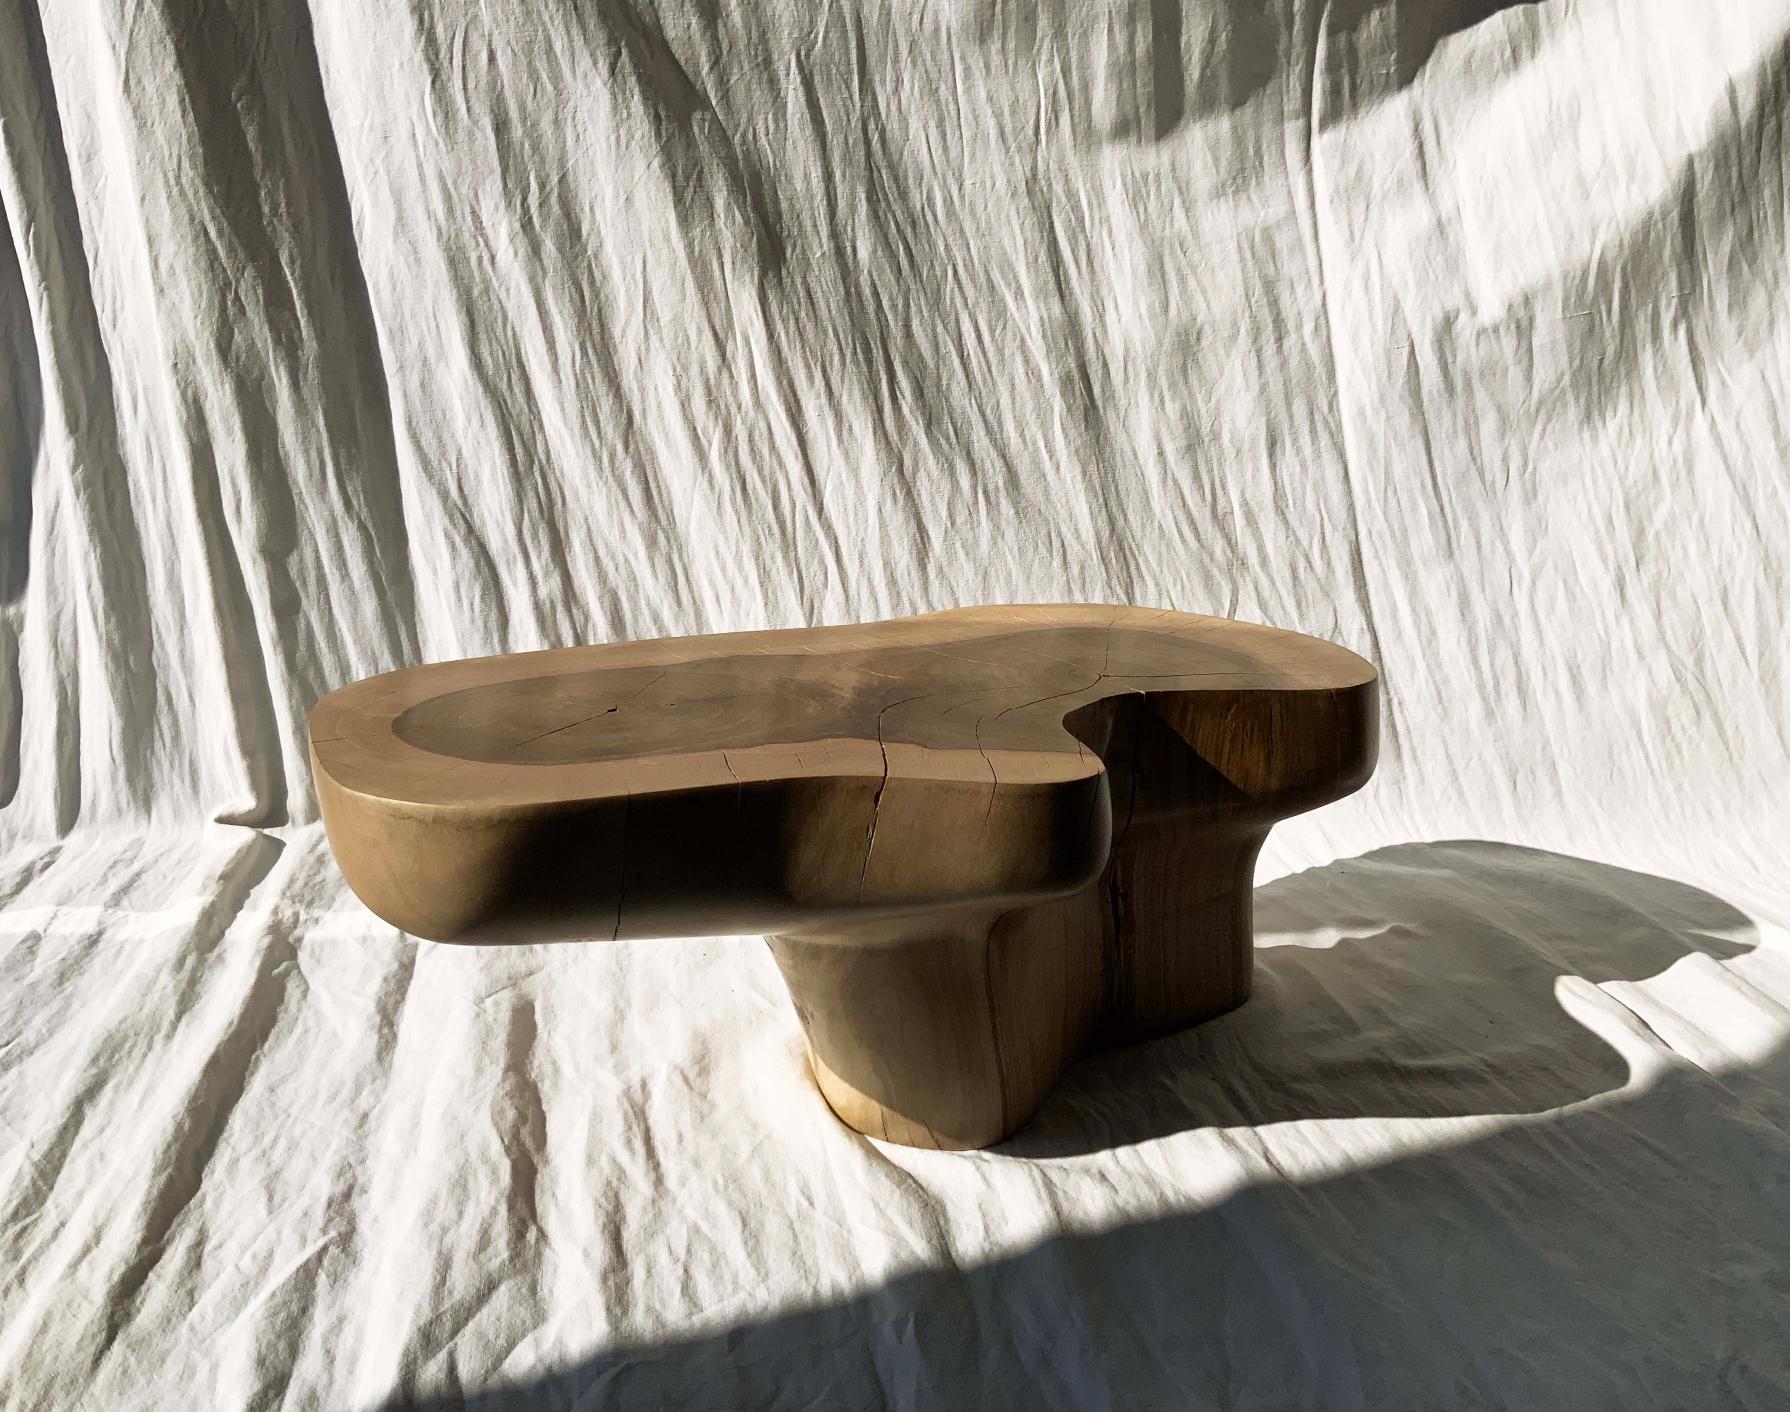 Pok stool 3 by Antoine Maurice
Dimensions: D 30 x H 20 cm
Materials: Walnut

Born in 1992, Antoine Maurice lives and works in Yvelines.
He trained in drawing at an art school and then in woodworking at the furniture school in Paris, La Bonne